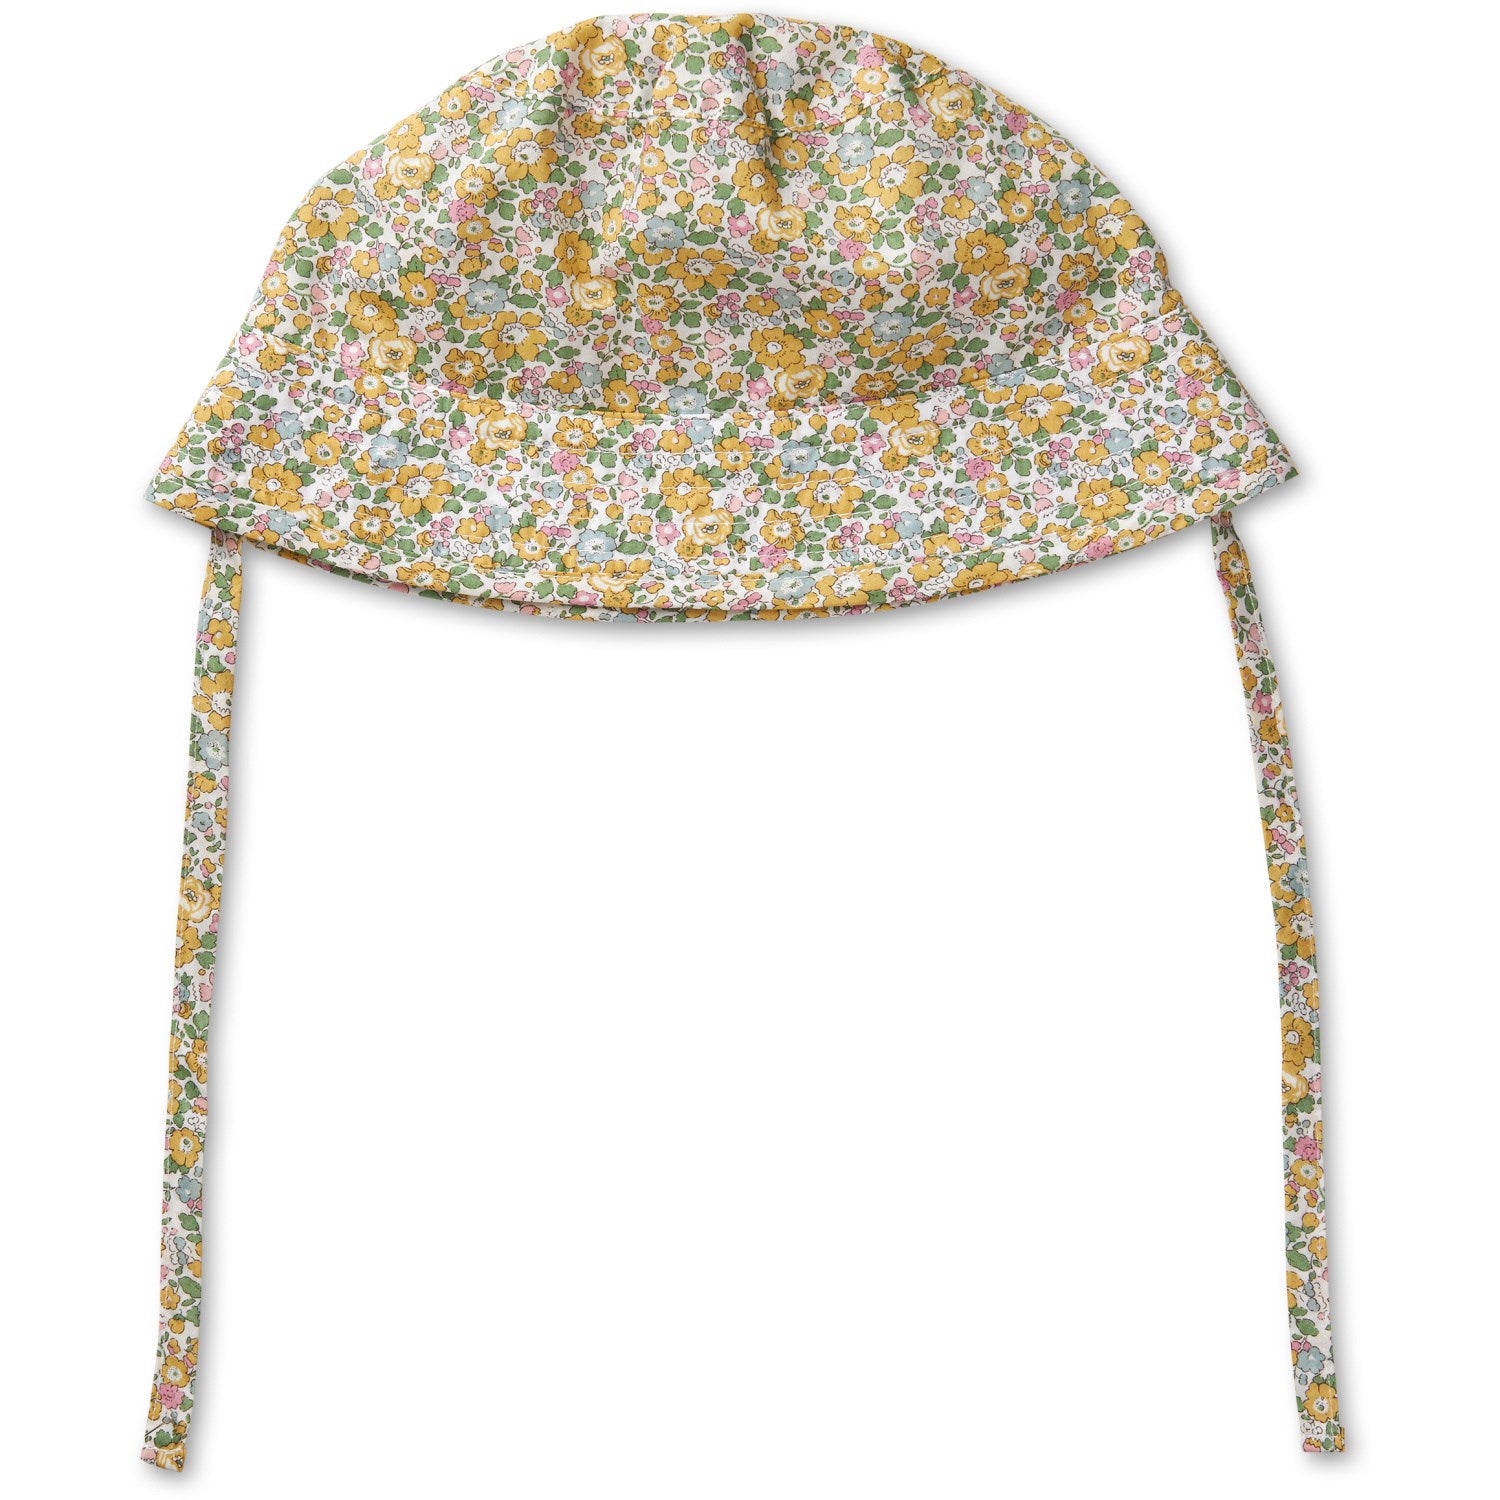 Lalaby Betsy Ann Loui Baby Hat - Betsy Ann